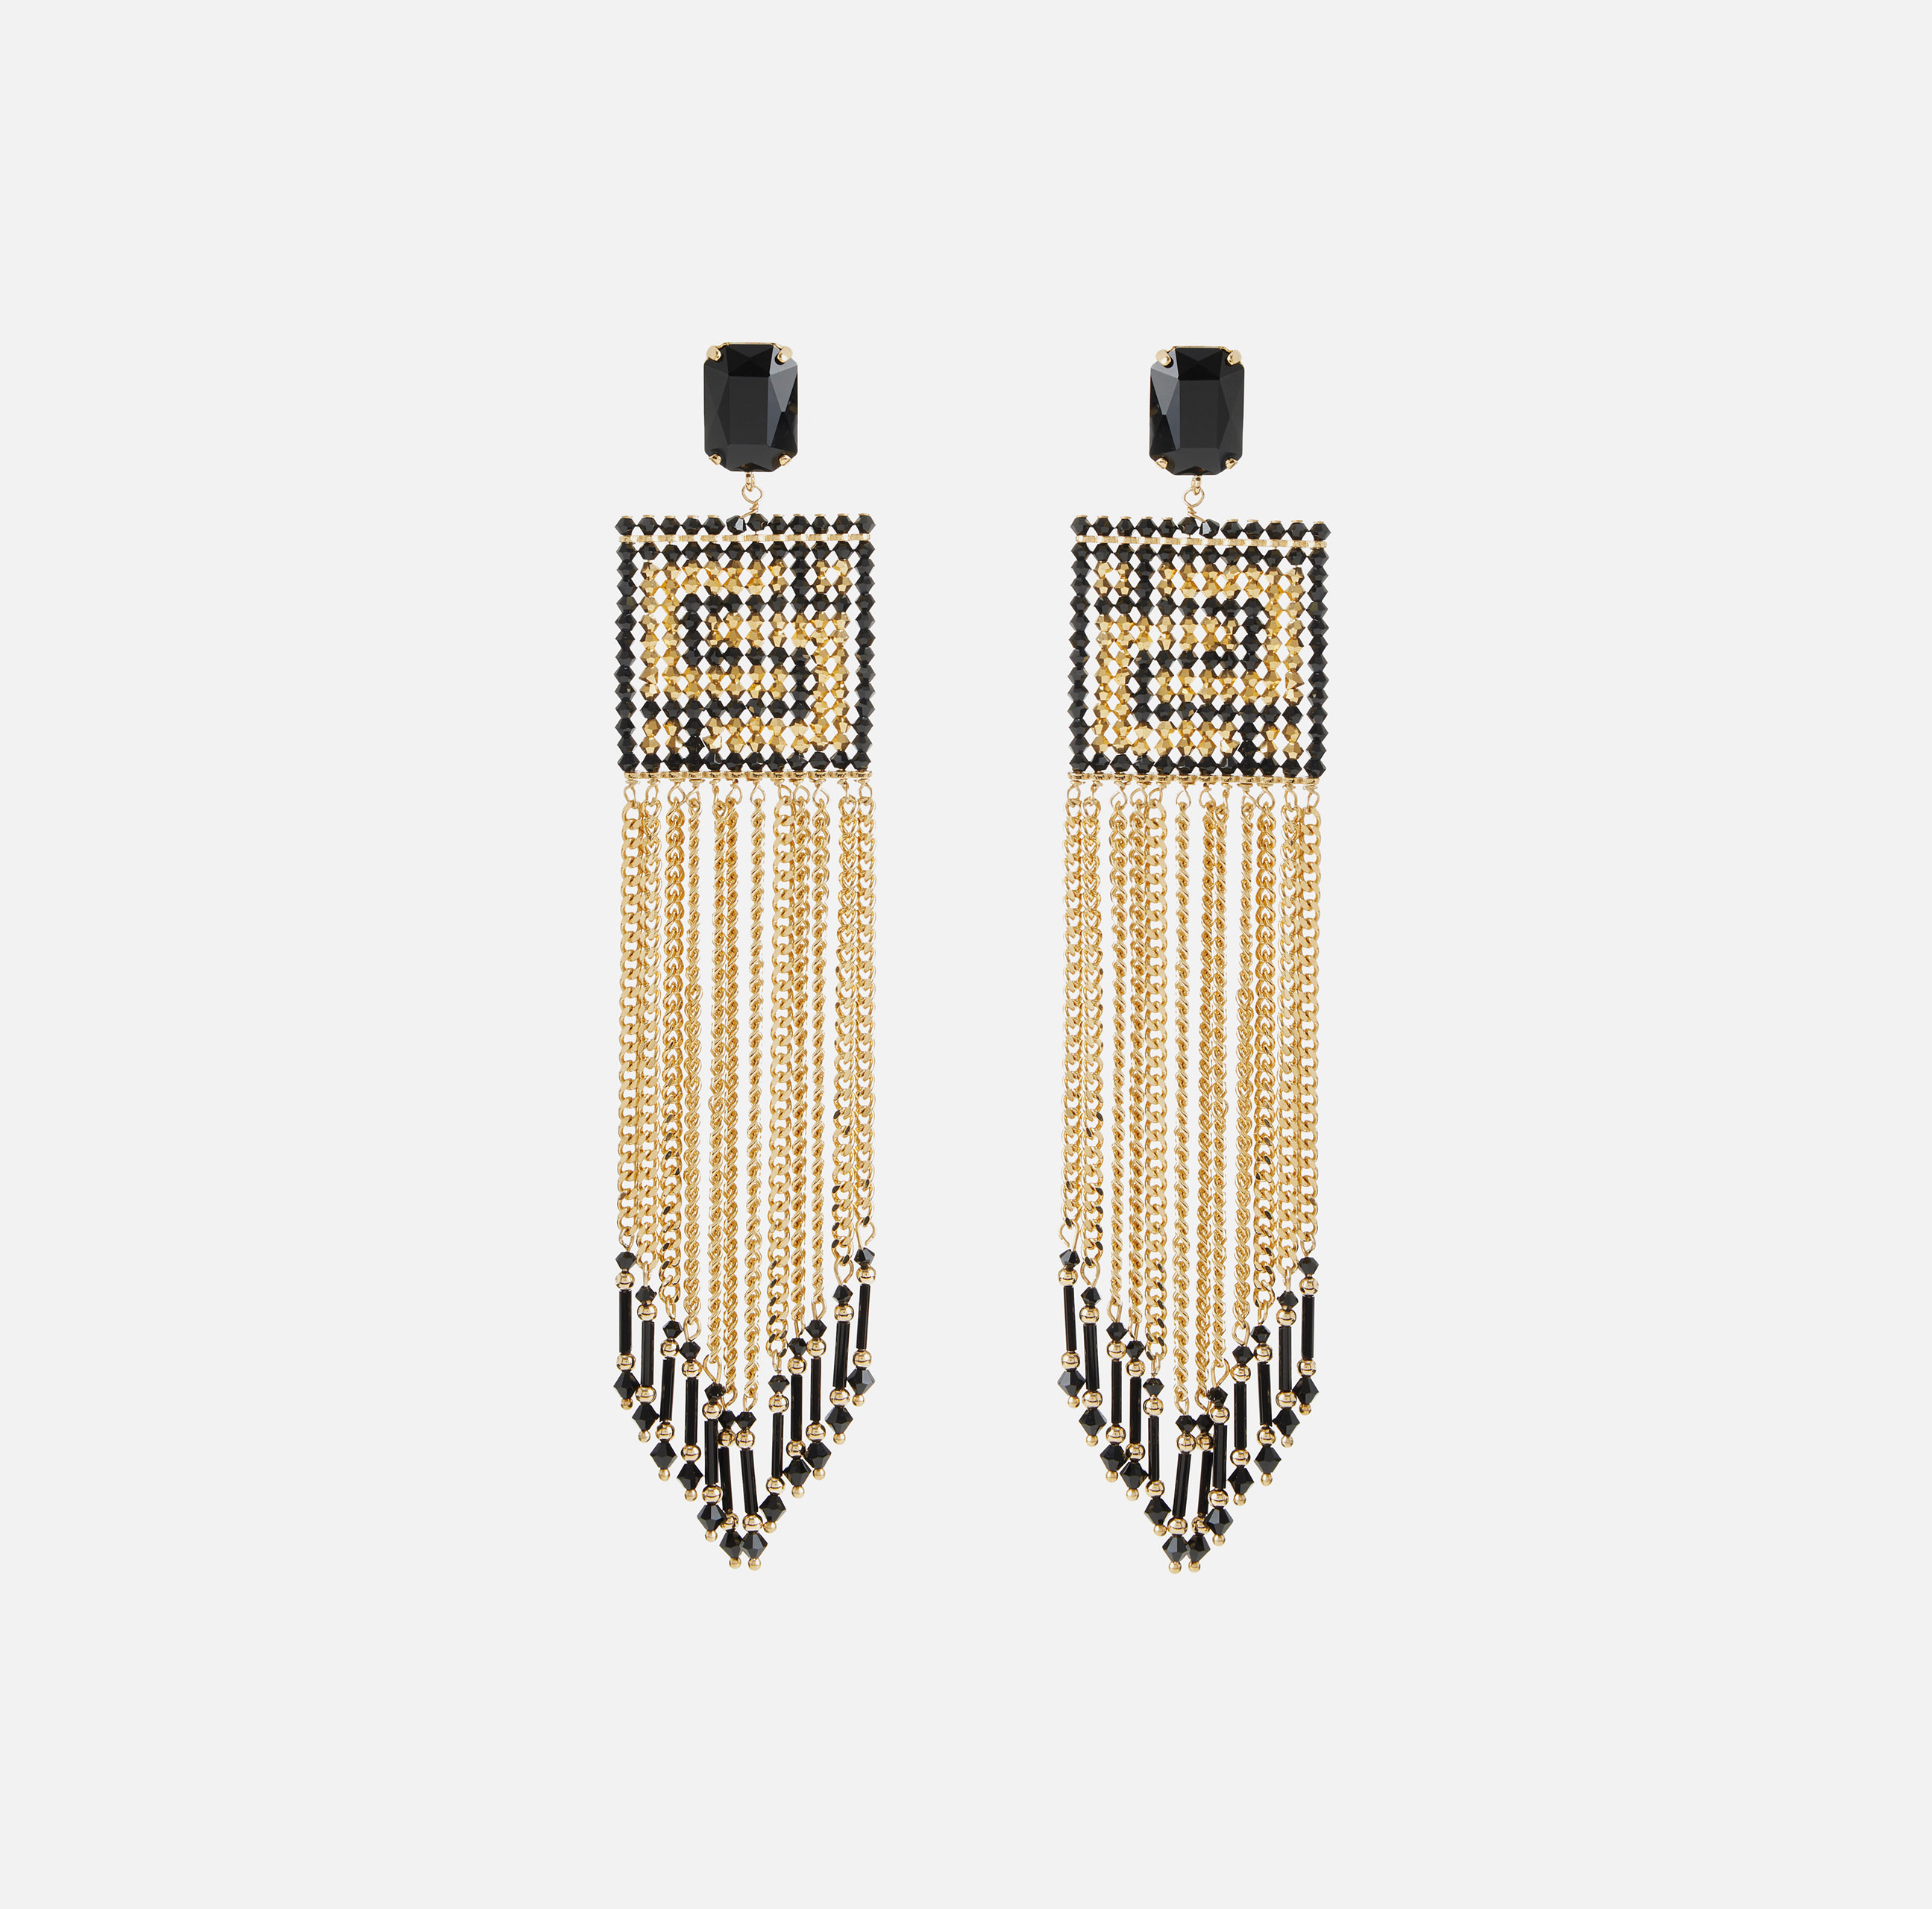 Earrings with beads - ACCESSORI - Elisabetta Franchi